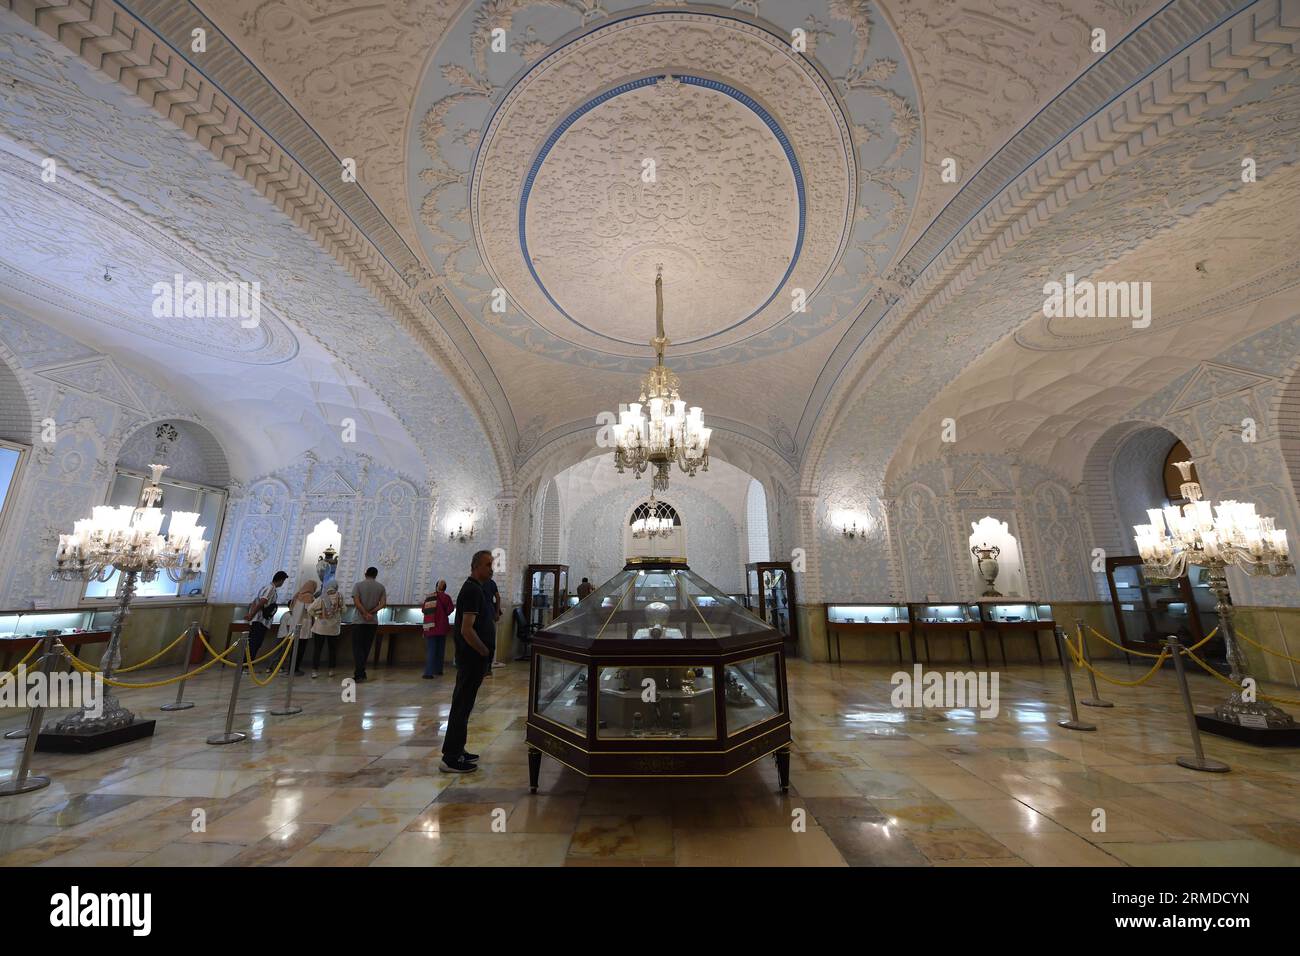 Tehran, Iran. 27th Aug, 2023. Tourists visit the Golestan Palace in Tehran, Iran, on Aug. 27, 2023. Golestan Palace is one of the oldest complexes in Tehran, originally built during the Safavid dynasty in the historic walled city. Following extensions and additions, the site received its most characteristic features in the 19th century, when the palace complex was selected as the royal residence and seat of power by the Qajar ruling family. Credit: Shadati/Xinhua/Alamy Live News Stock Photo